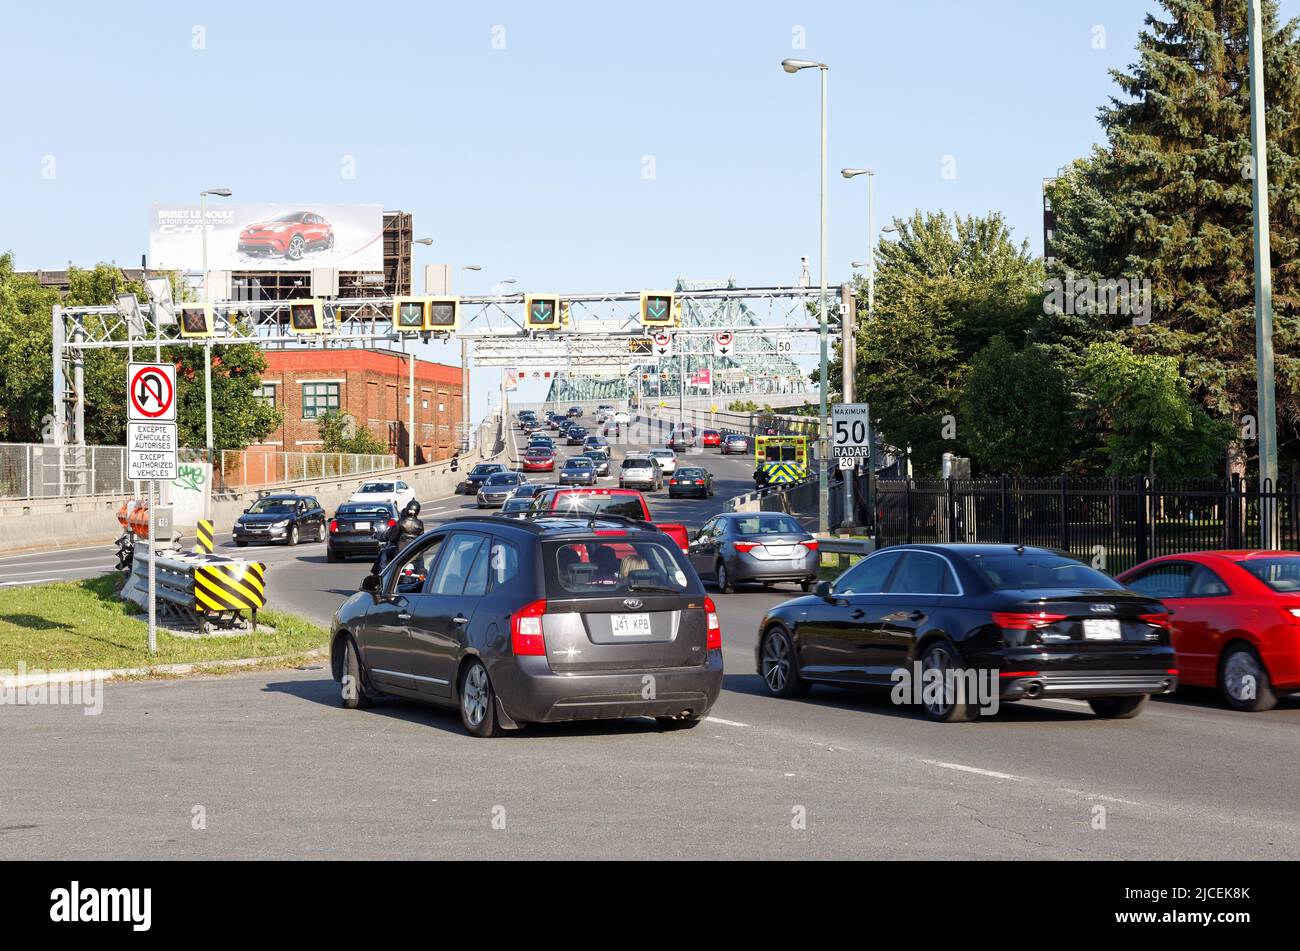 Traffic on the bridge ramp to the Jacques-Cartier bridge in Montreal. Quebec, Canada Stock Photo